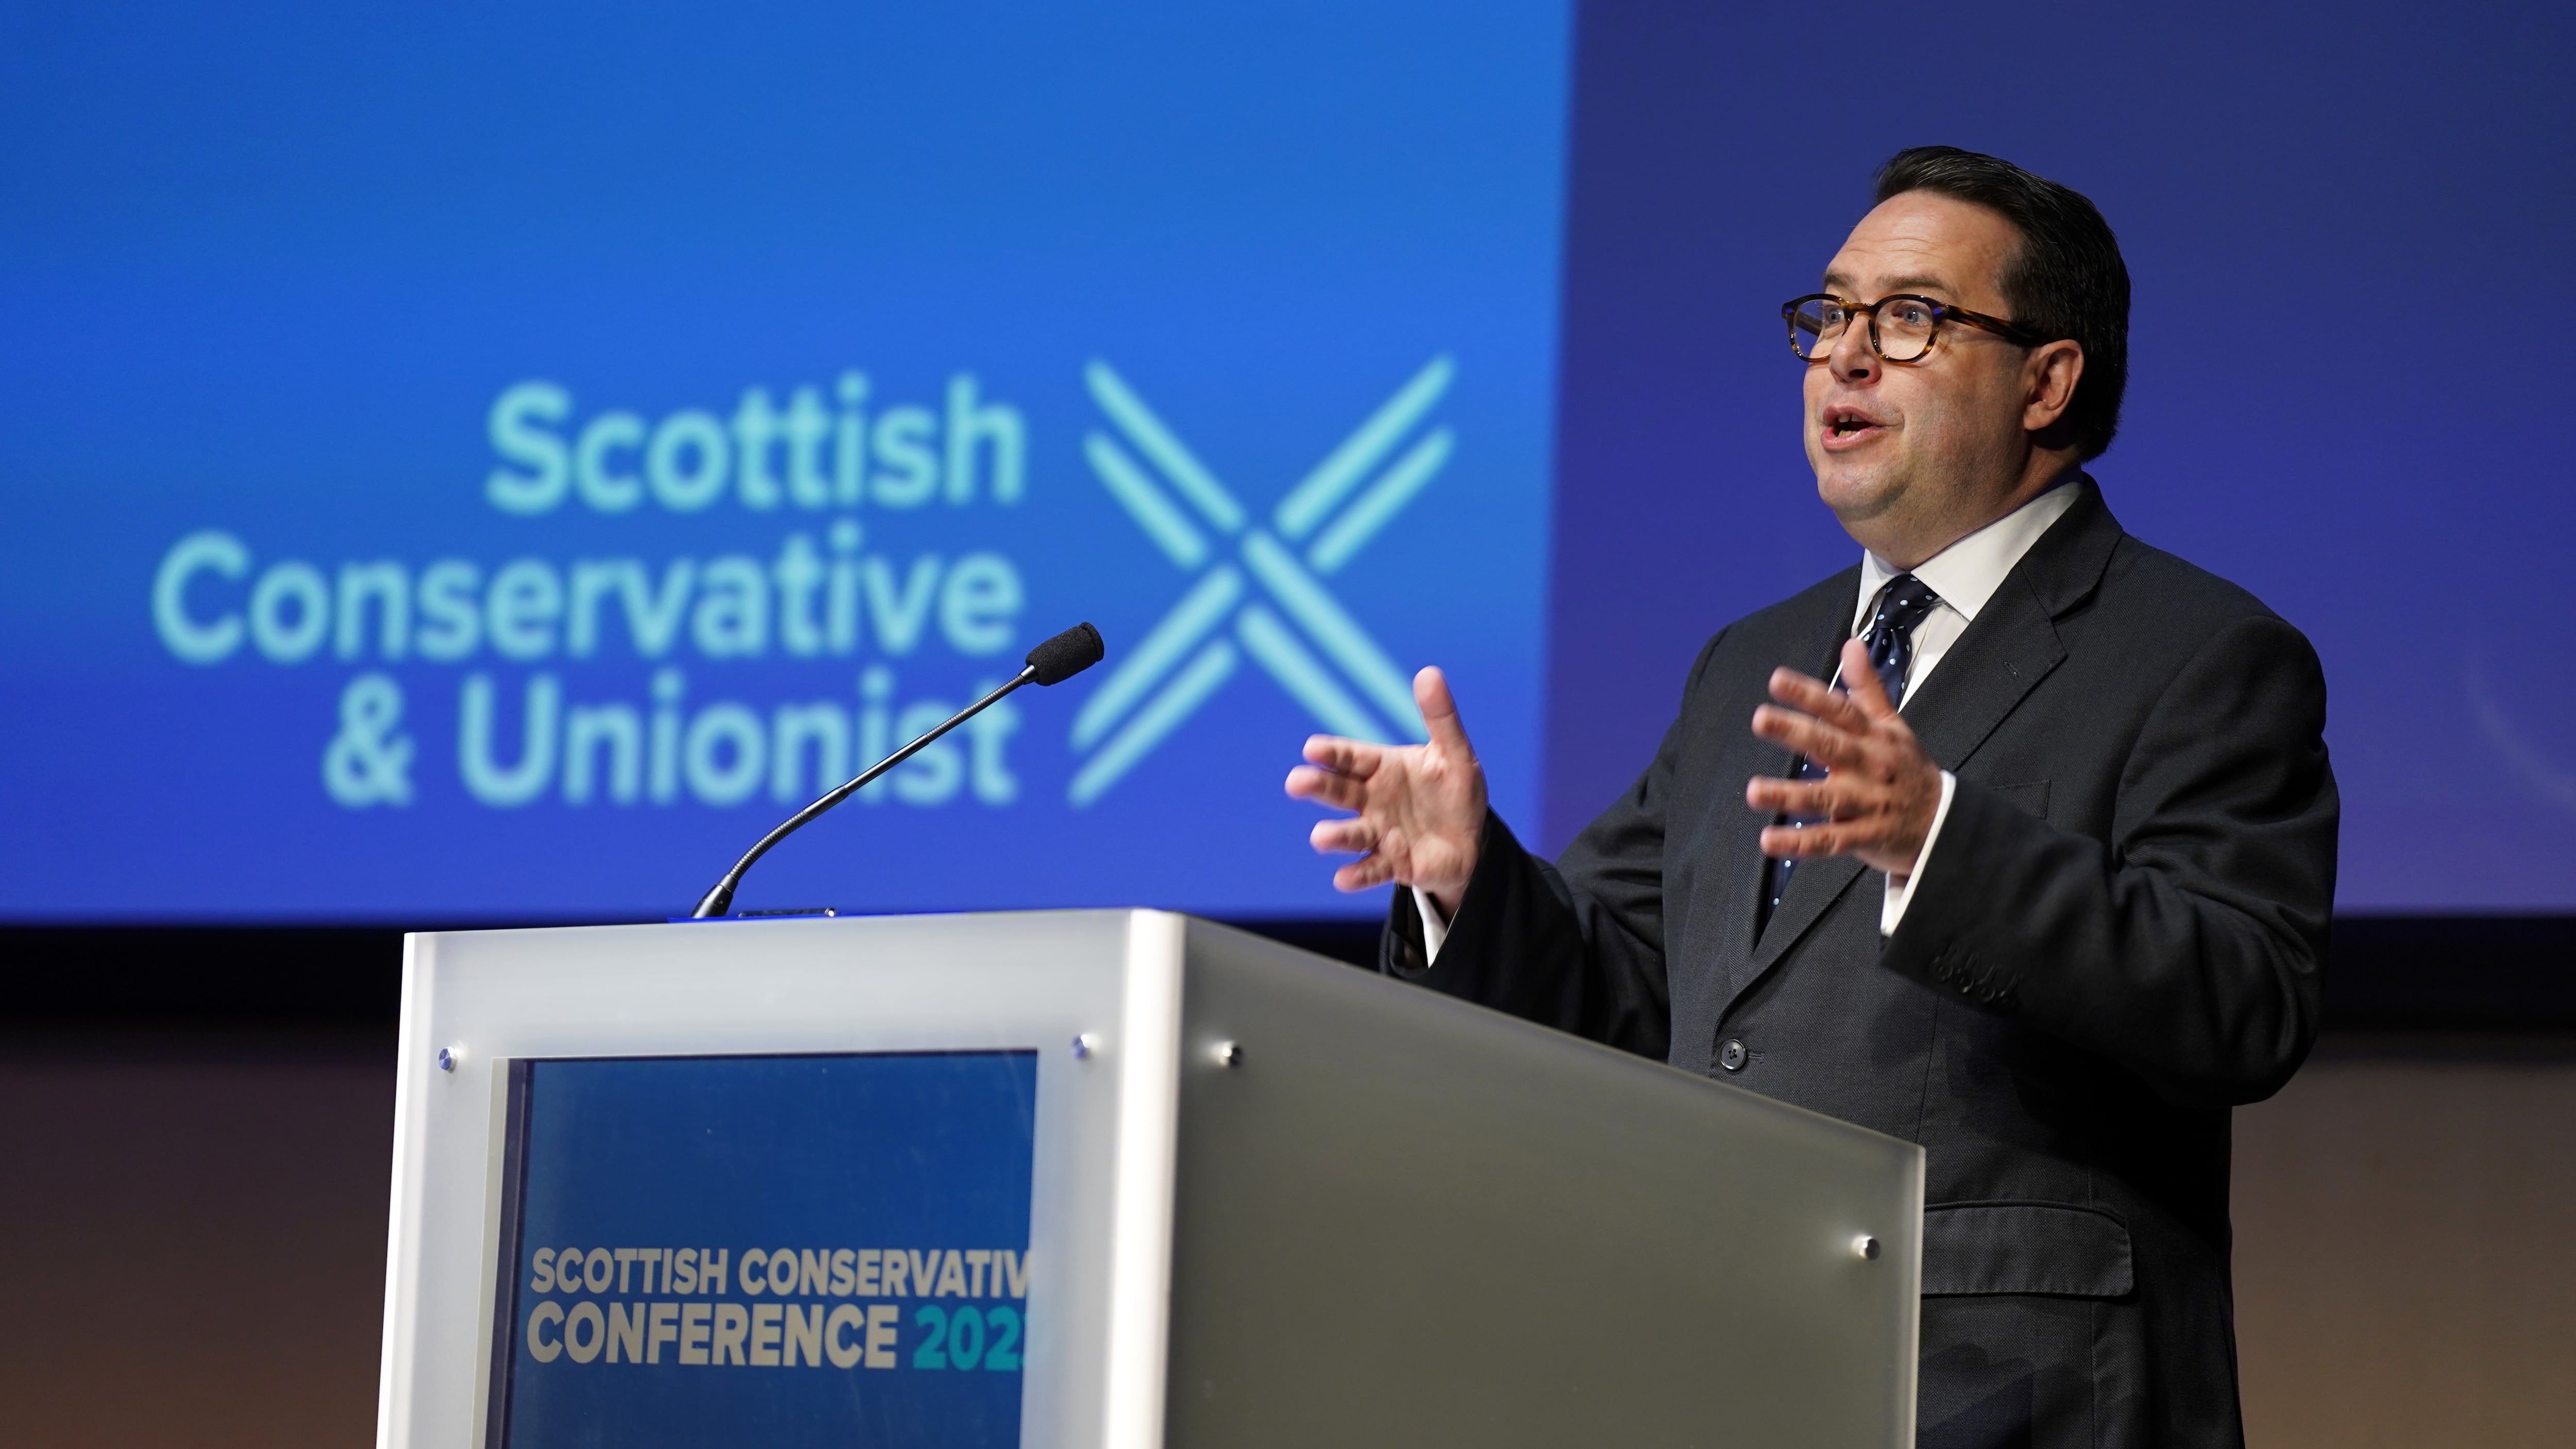 Scottish Conservative chair Craig Hoy has said Thursday’s election could be the ‘season finale’ to the independence debate .